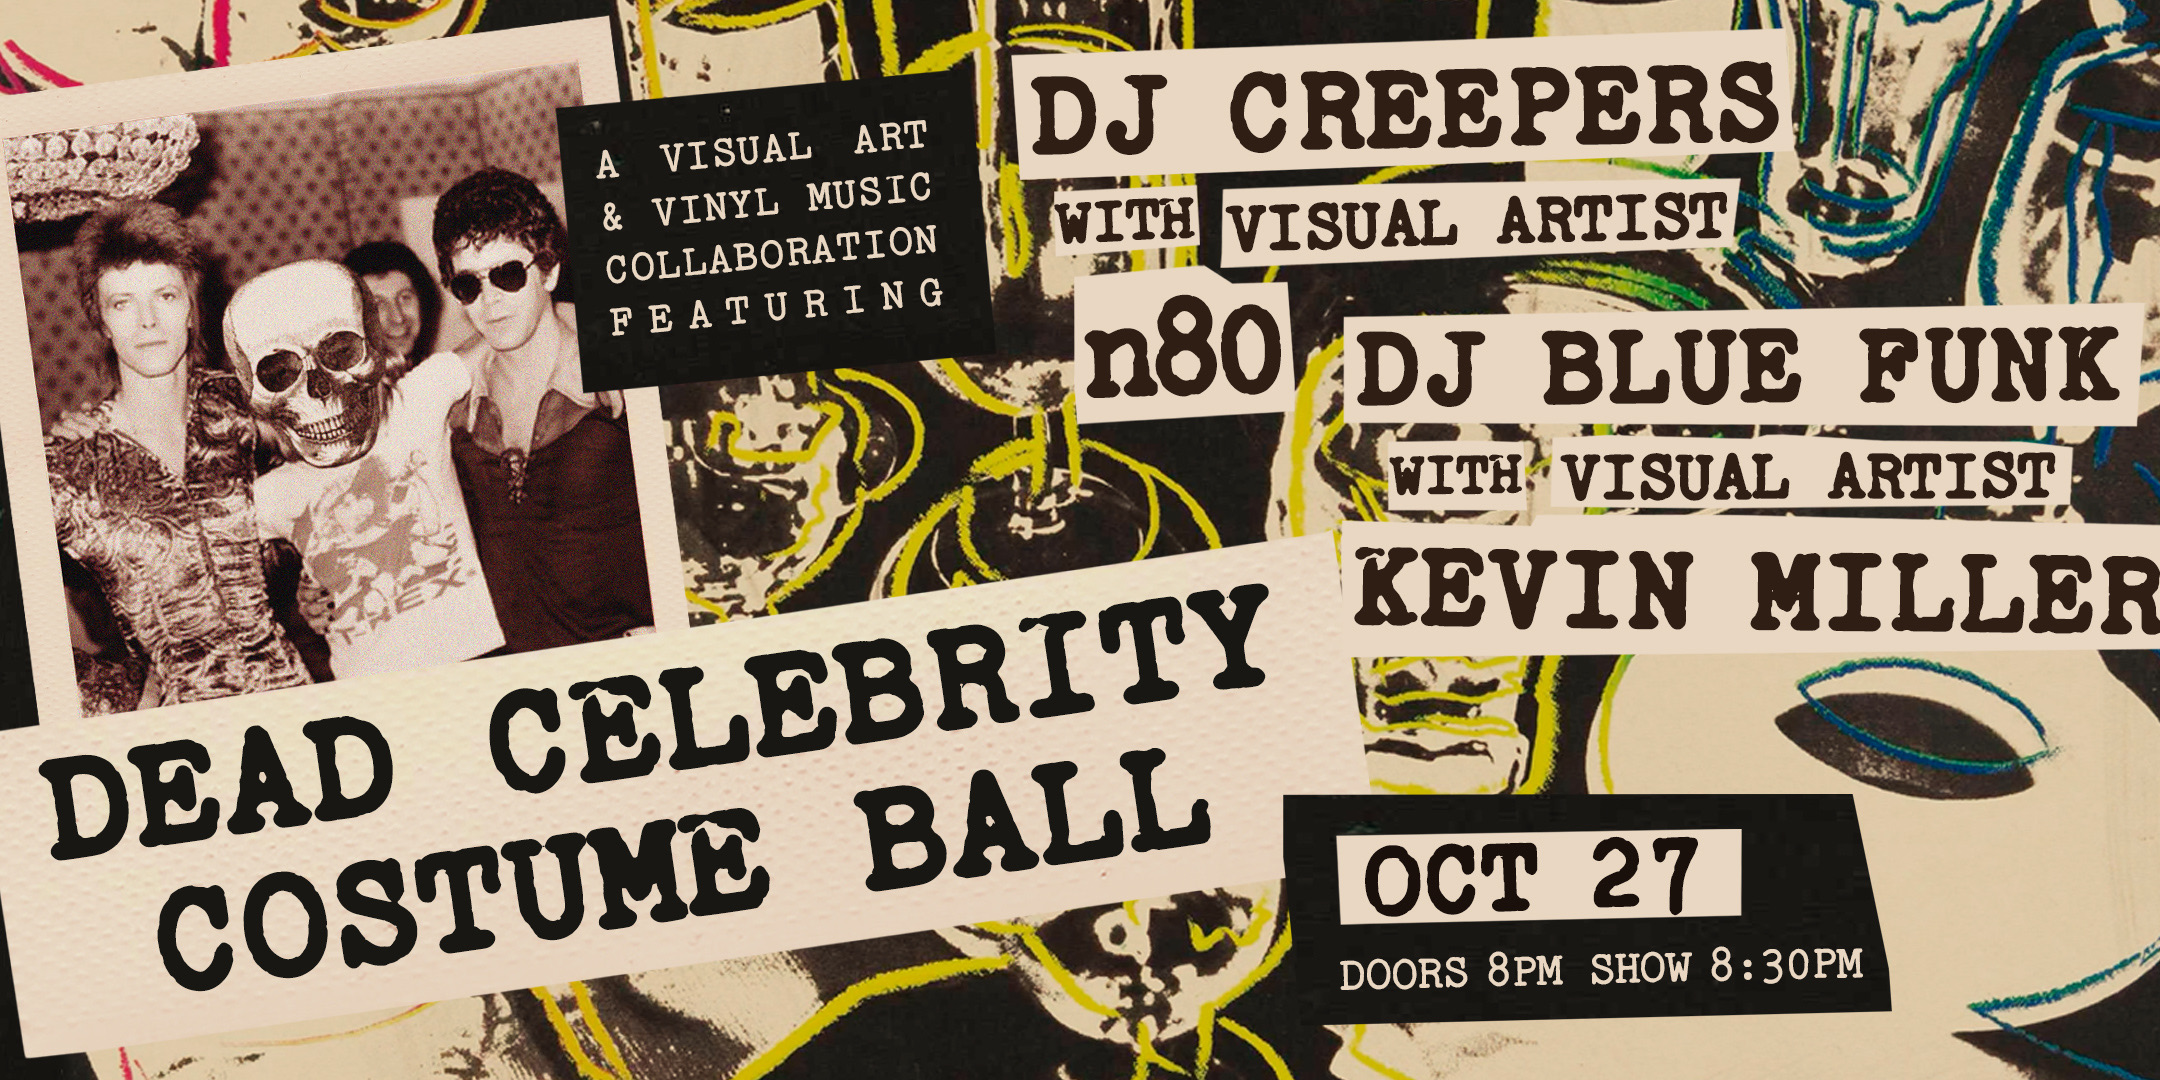 Dead-Celebrity Costume Ball: A Visual & Vinyl Music Collaboration Friday, October 27 The Hook and Ladder Theater Doors 4:00pm :: Music 7:00pm GA: $15 ADV / $20 DOS